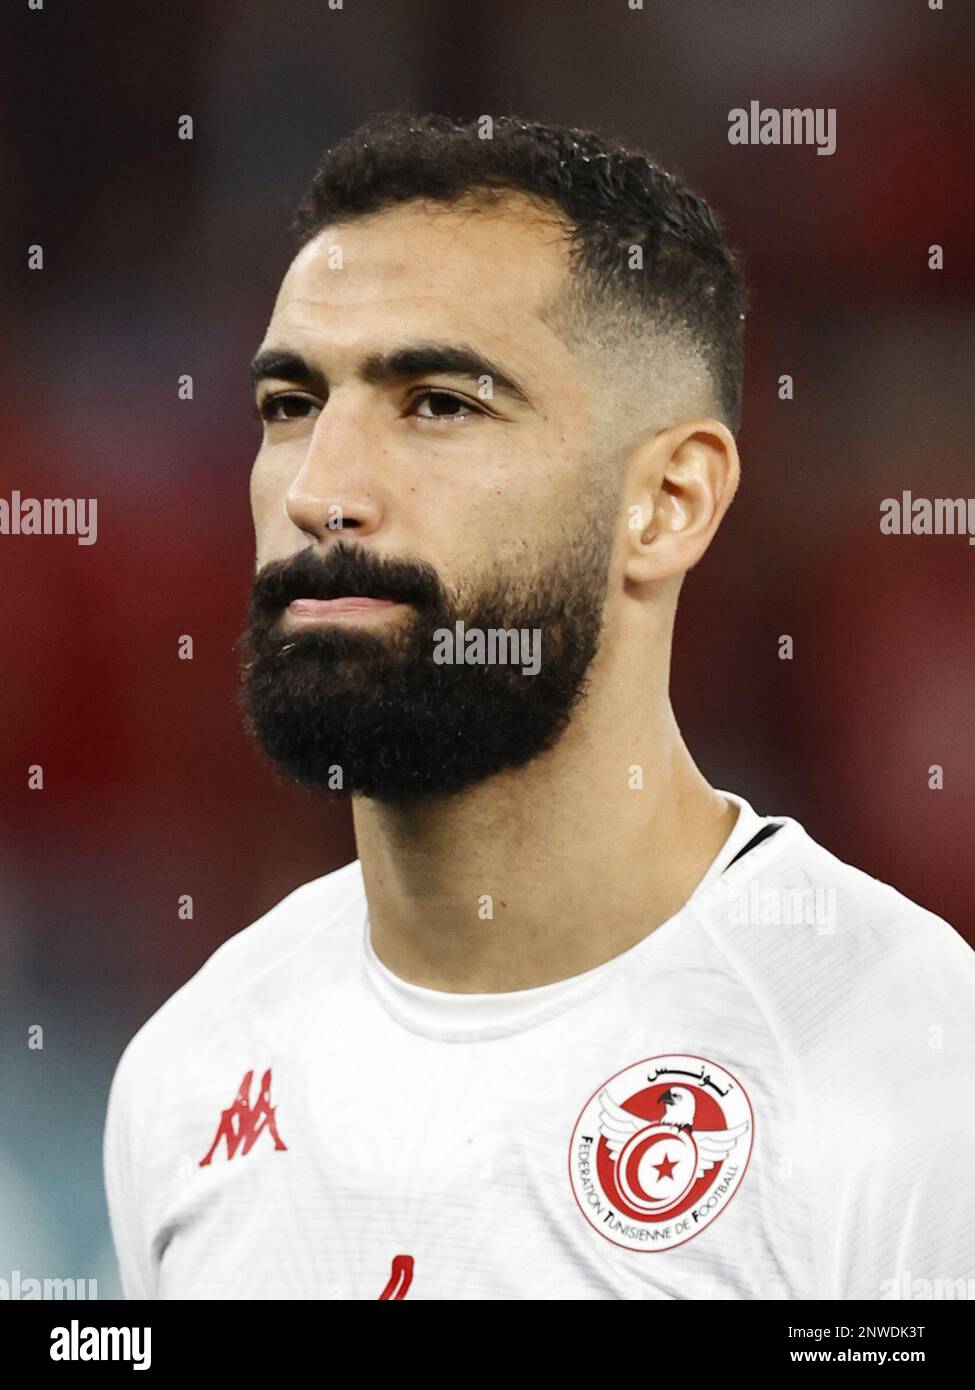 DOHA - Yassine Meriah of Tunisia during the FIFA World Cup Qatar 2022 group D match between Tunisia and France at Education City Stadium on November 30, 2022 in Doha, Qatar. AP | Dutch Height | MAURICE OF STONE Stock Photo